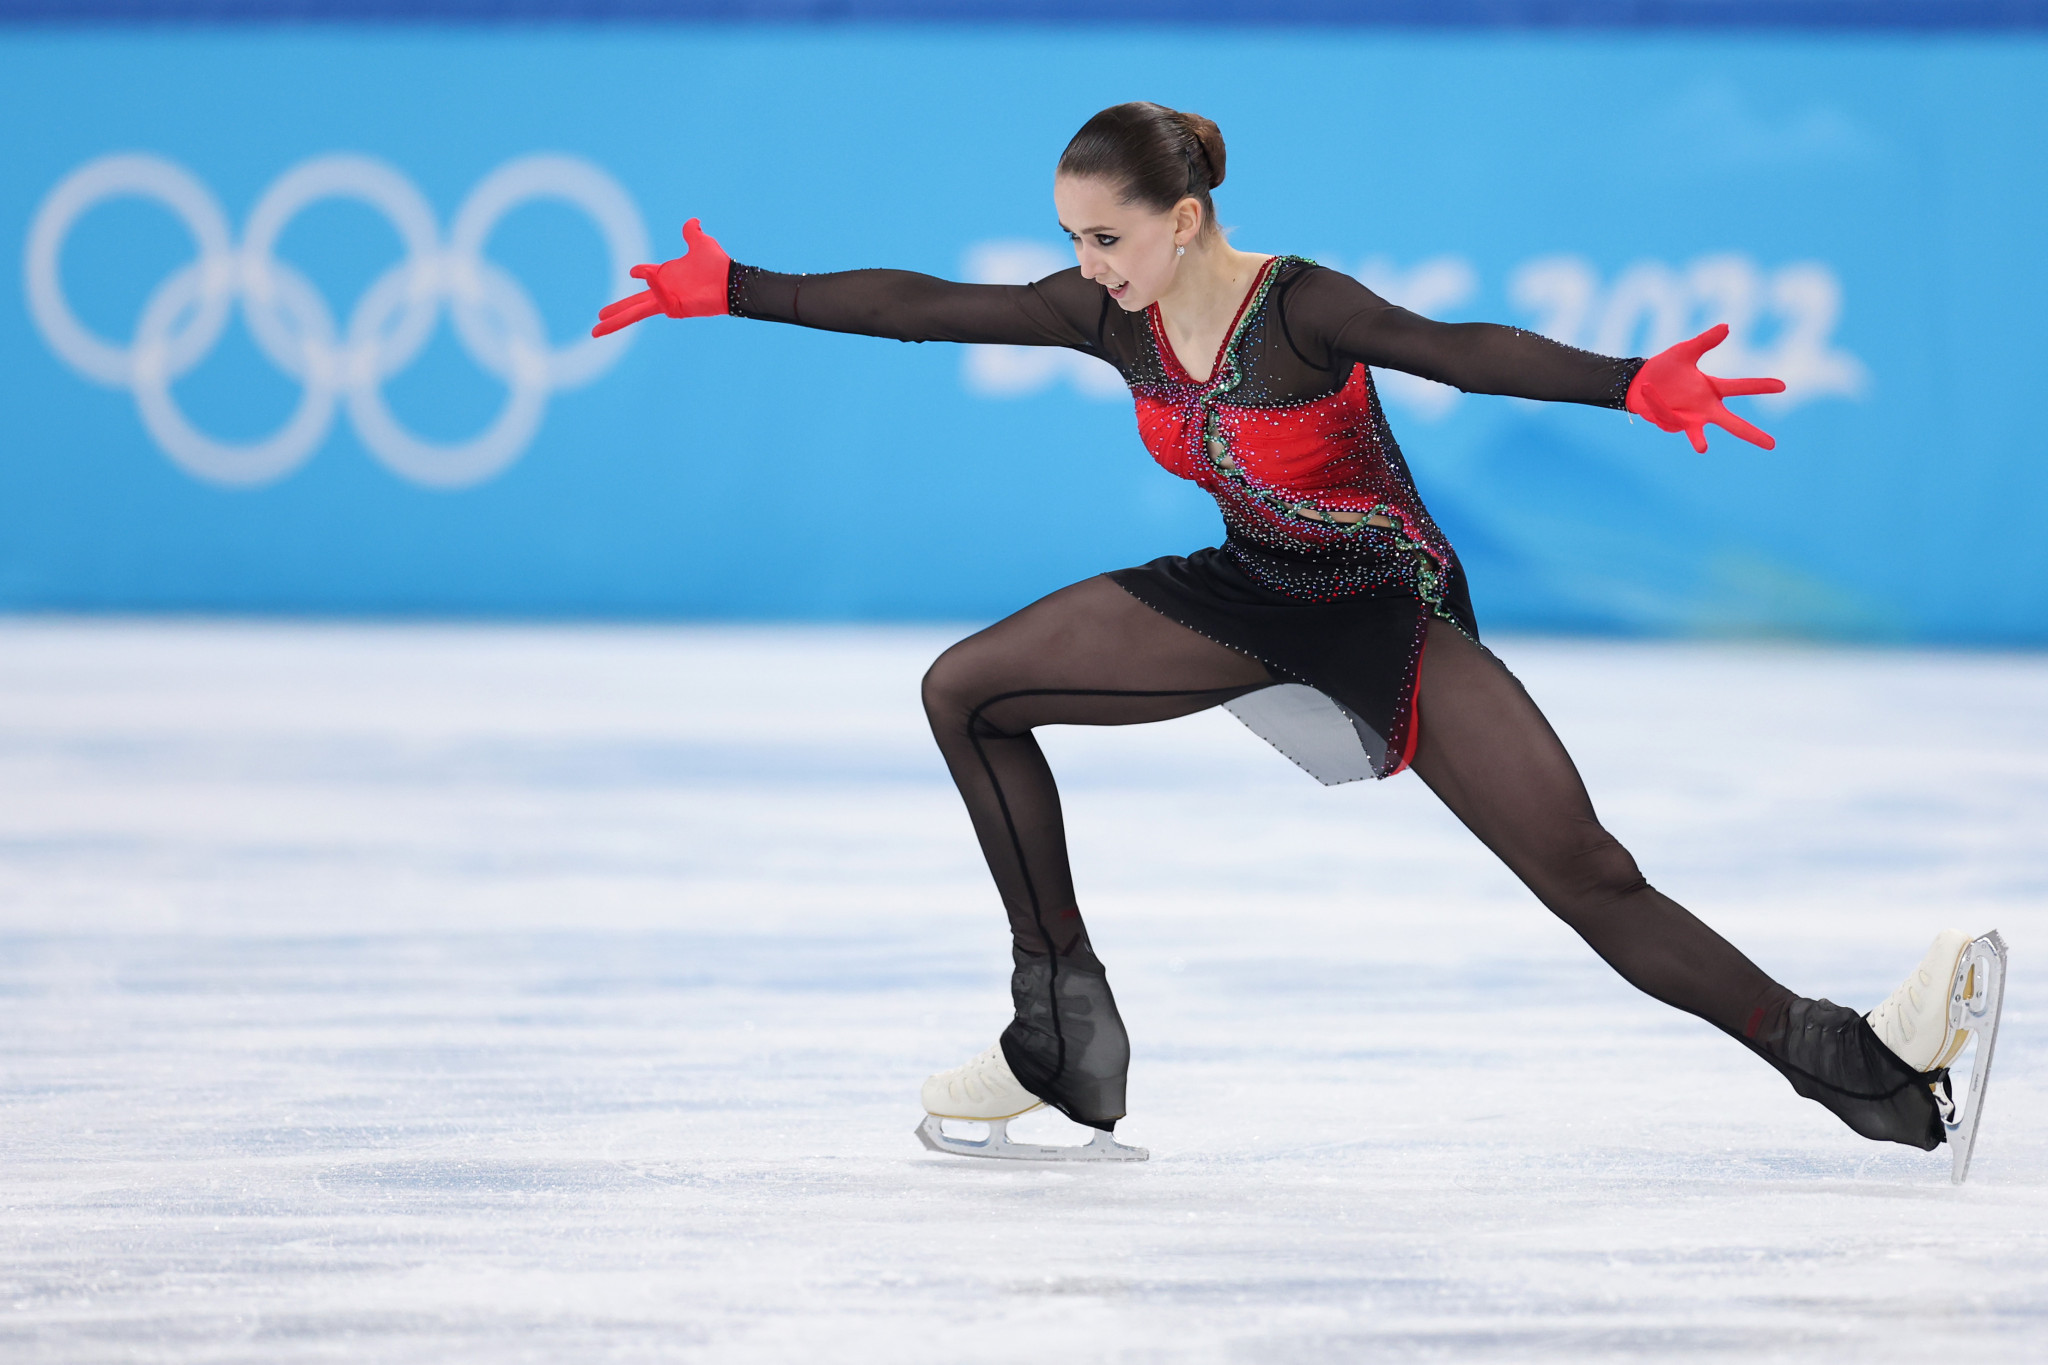 A RUSADA tribunal yesterday found Russian figure skater Kamila Valieva should bear "no fault or negligence" for an anti-doping rule violation ©Getty Images